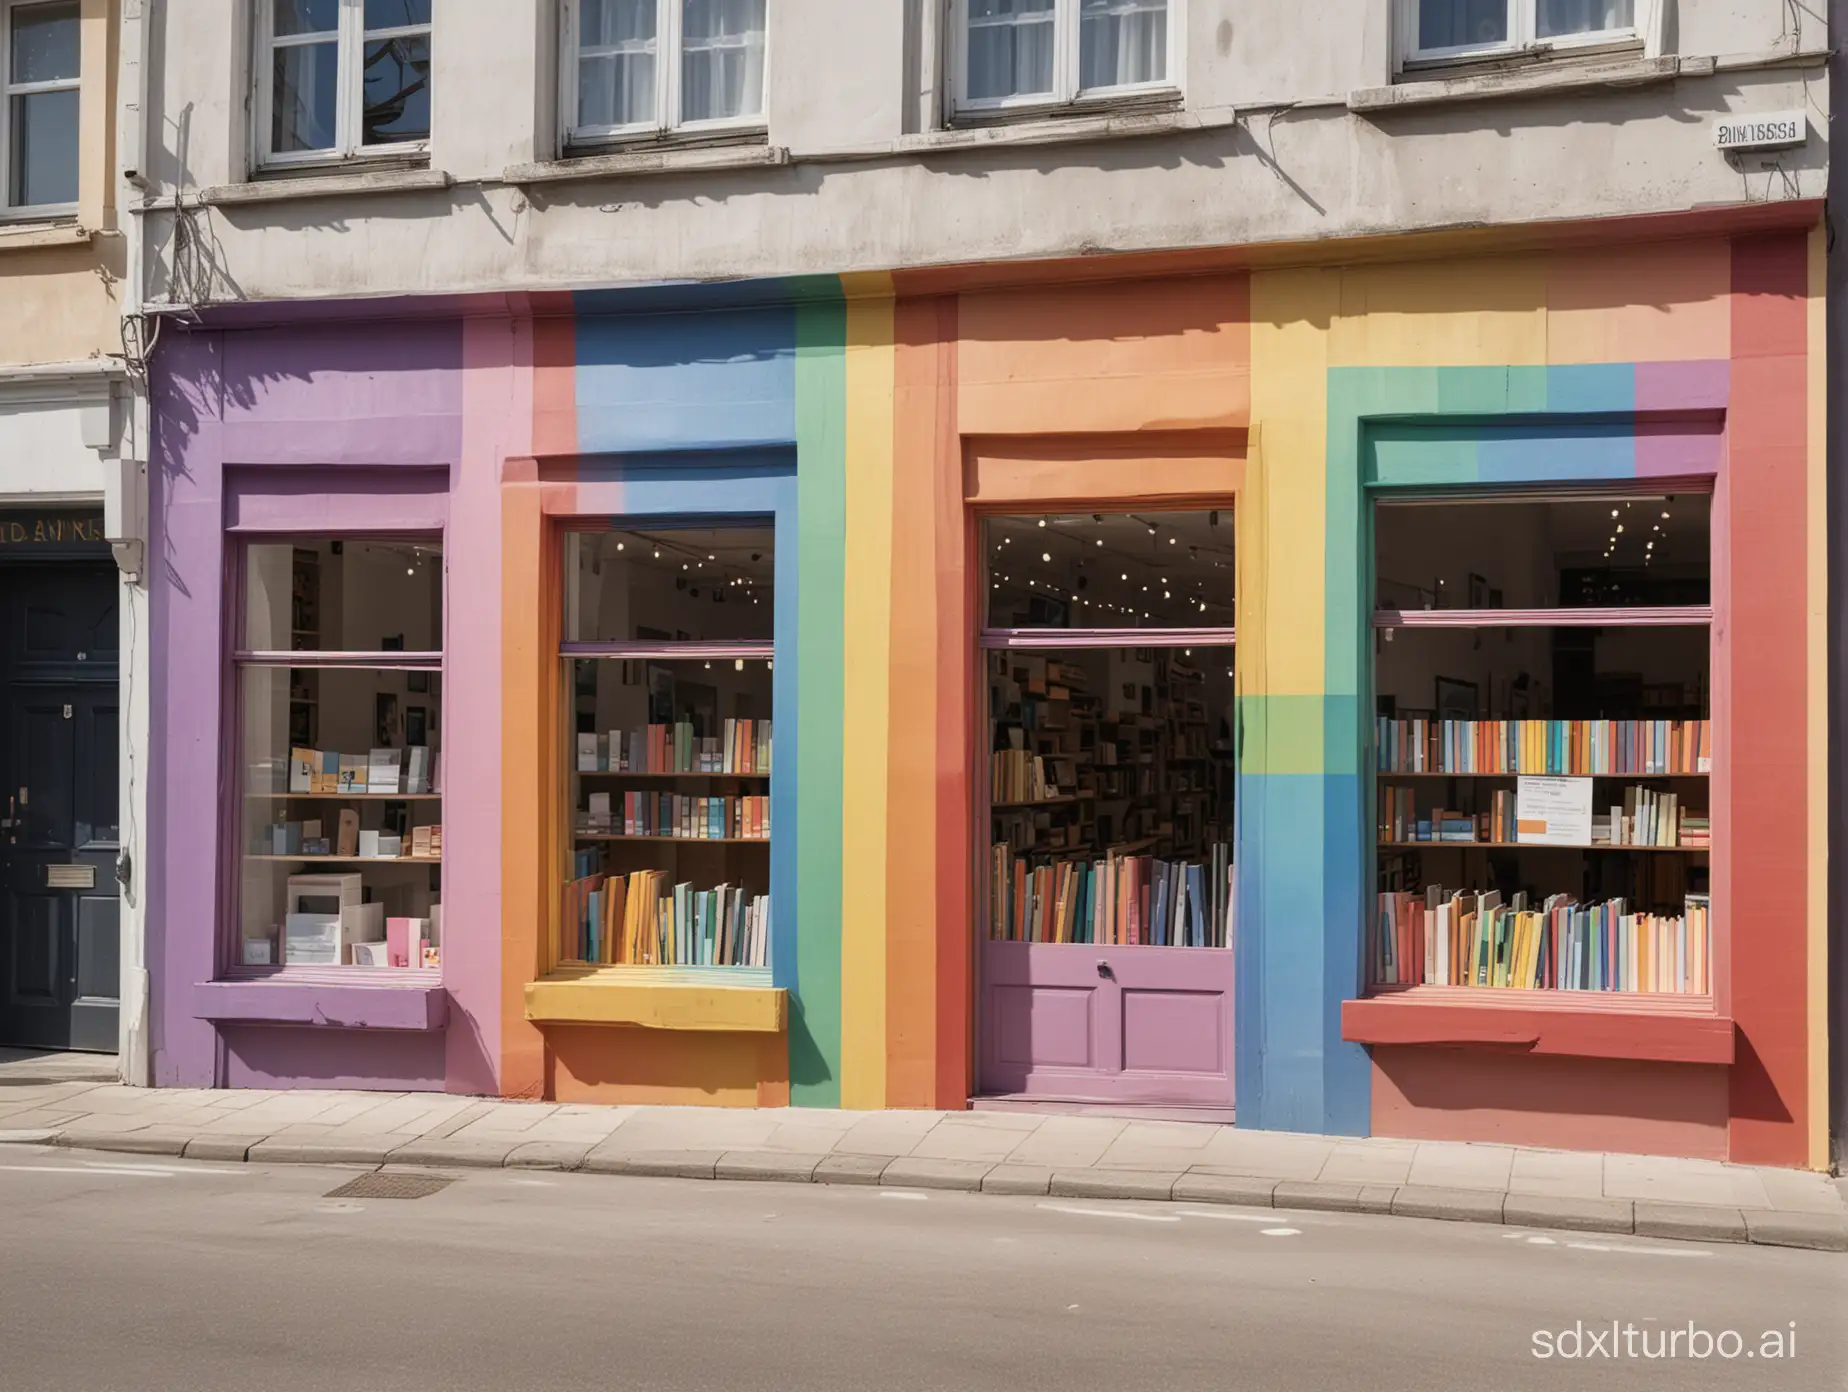 a photography of the front of a design shop, boxes with rainbow colors are exposed inside